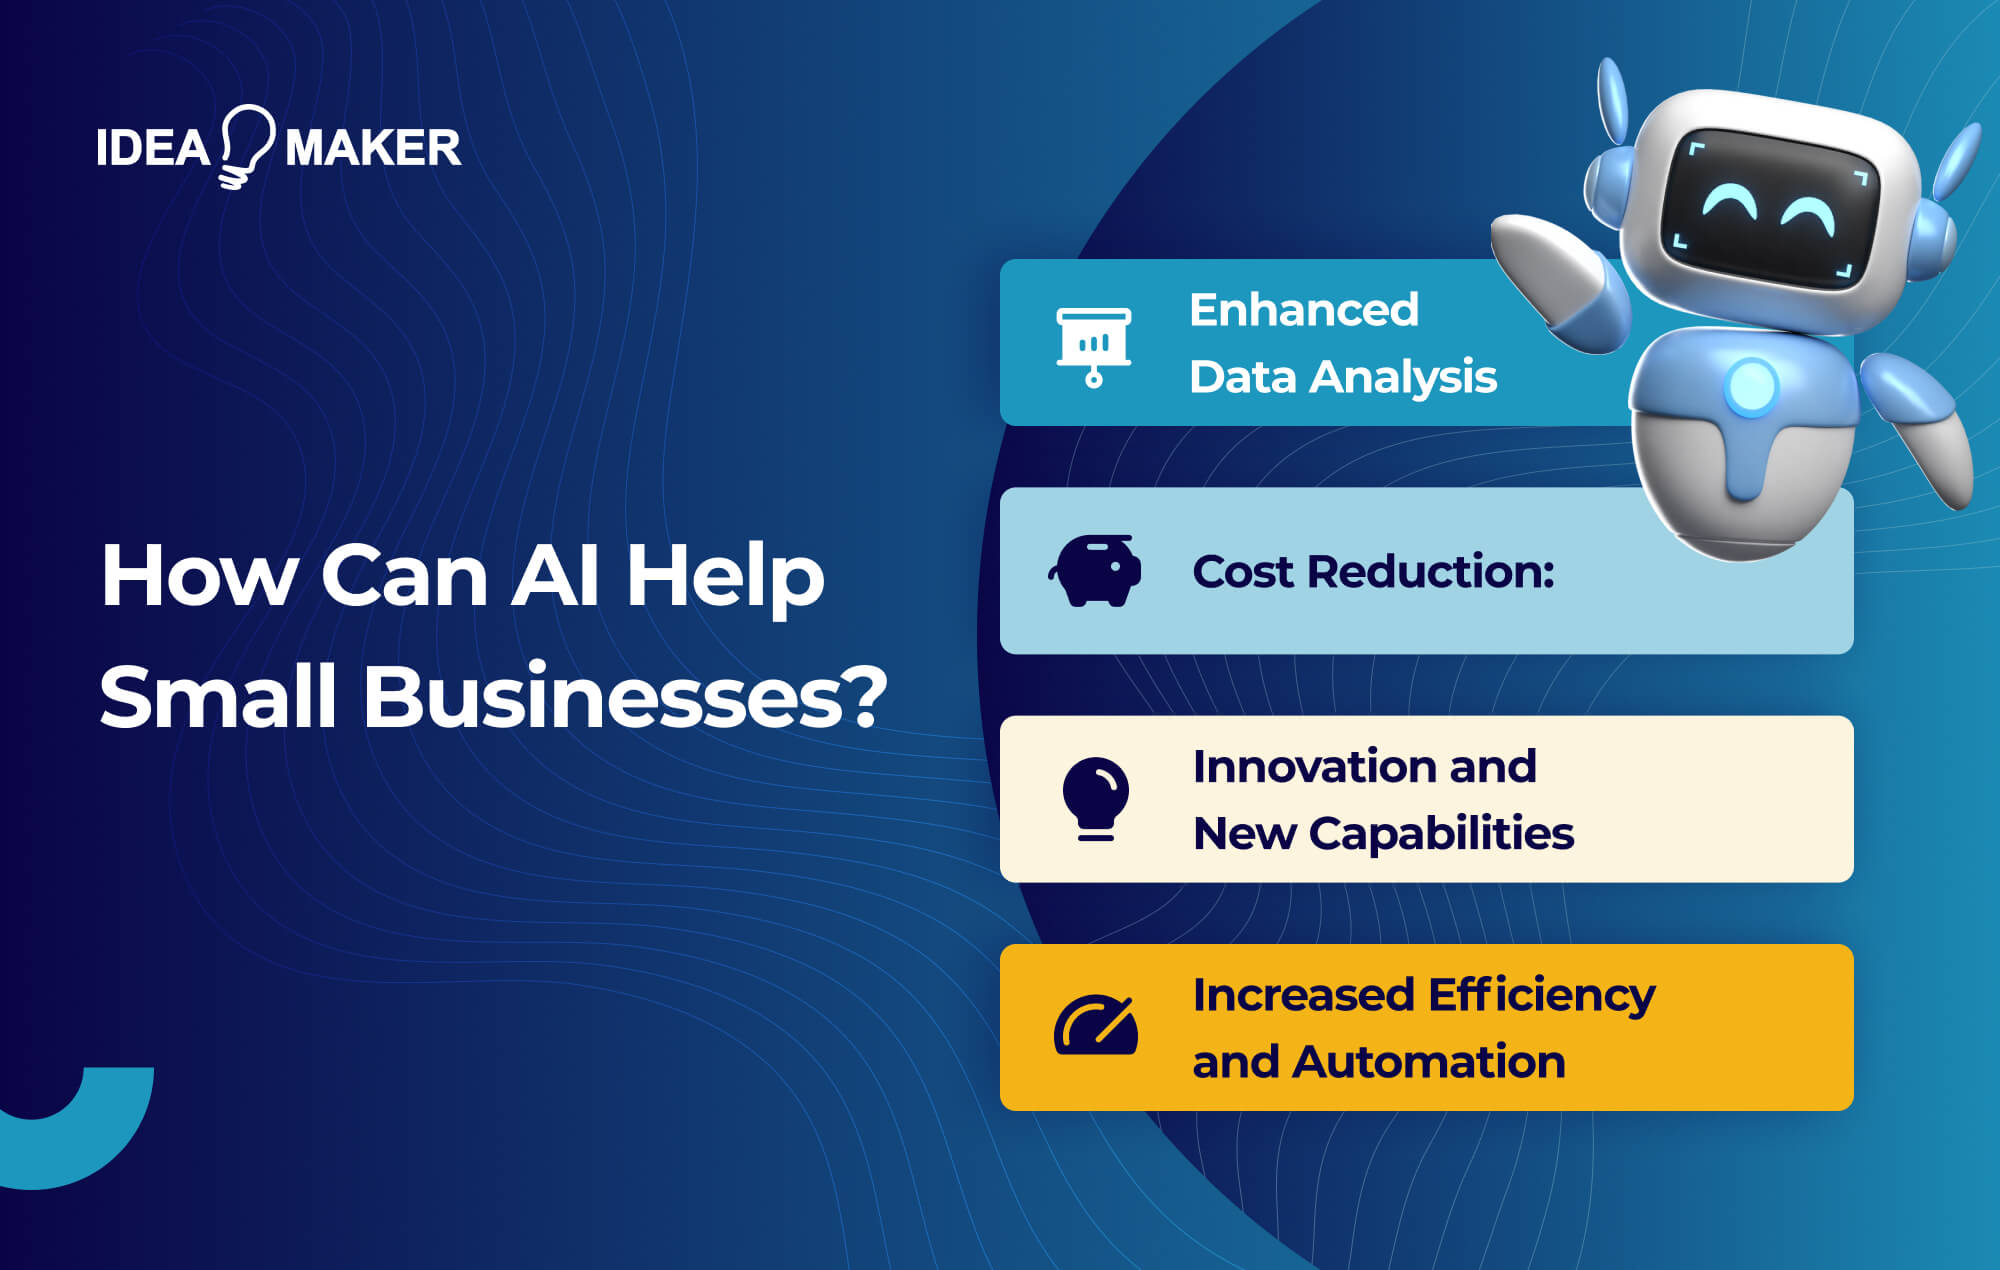 Ideamaker -How Can AI Help Small Businesses